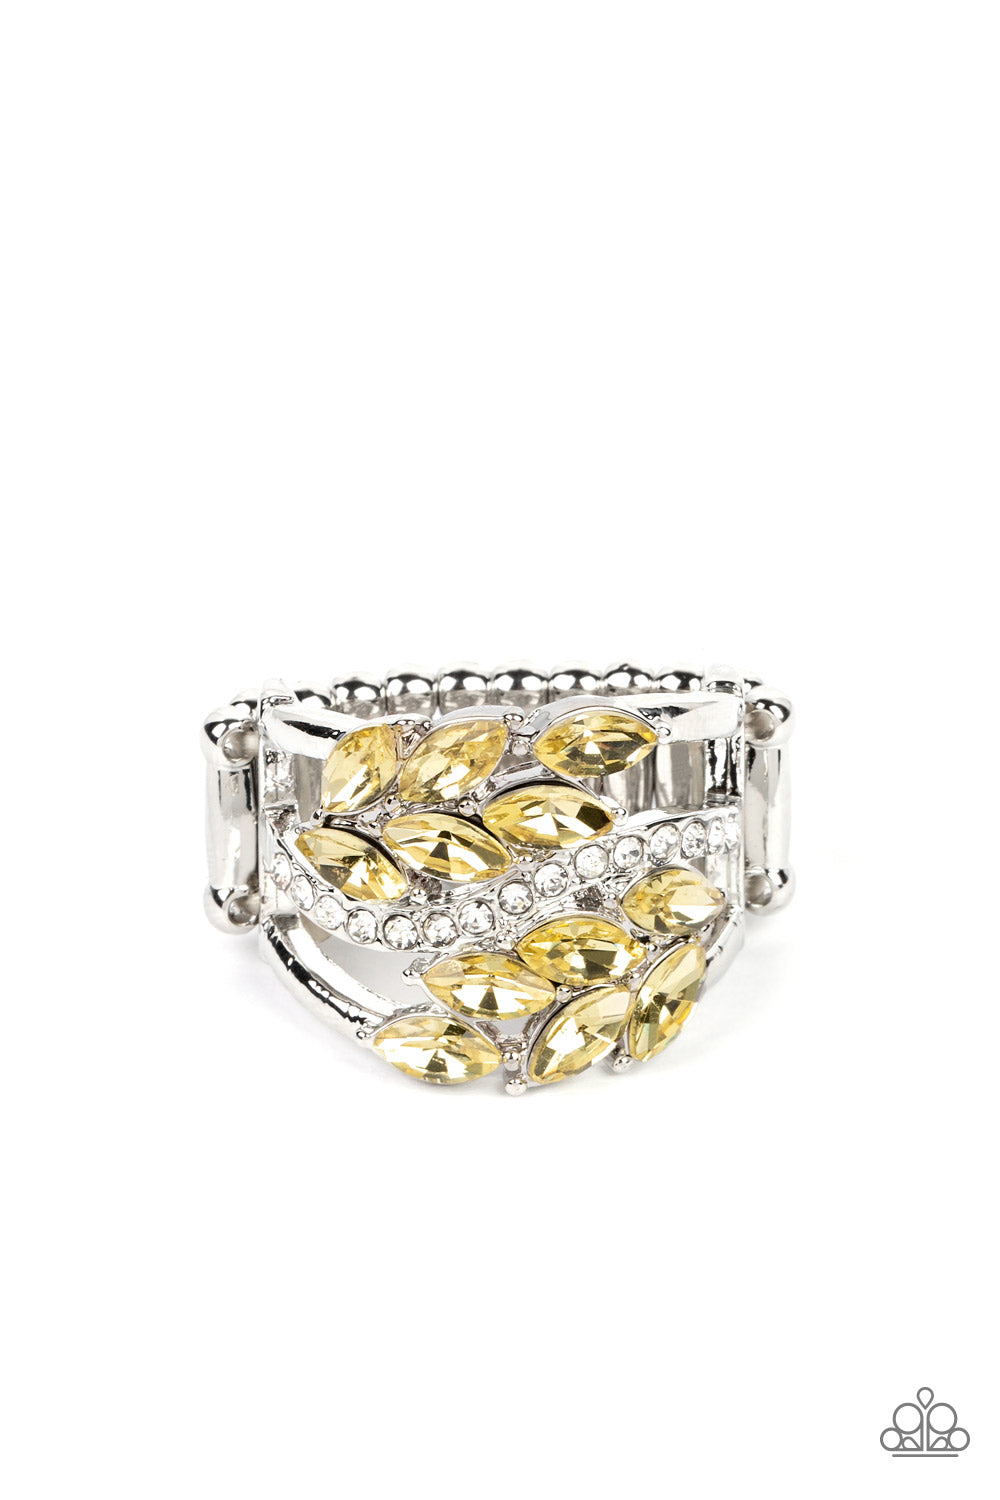 Luminously Leafy Yellow Ring - Paparazzi Accessories Item #P4RE-YWXX-076XX Clusters of yellow marquise-cut crystals flank a wavy band of dainty white rhinestones atop the finger. The yellow crystals fall into a leafy pattern, adding a touch of earthy elegance to the luminously layered look. Features a stretchy band for a flexible fit.  Sold as one individual ring.